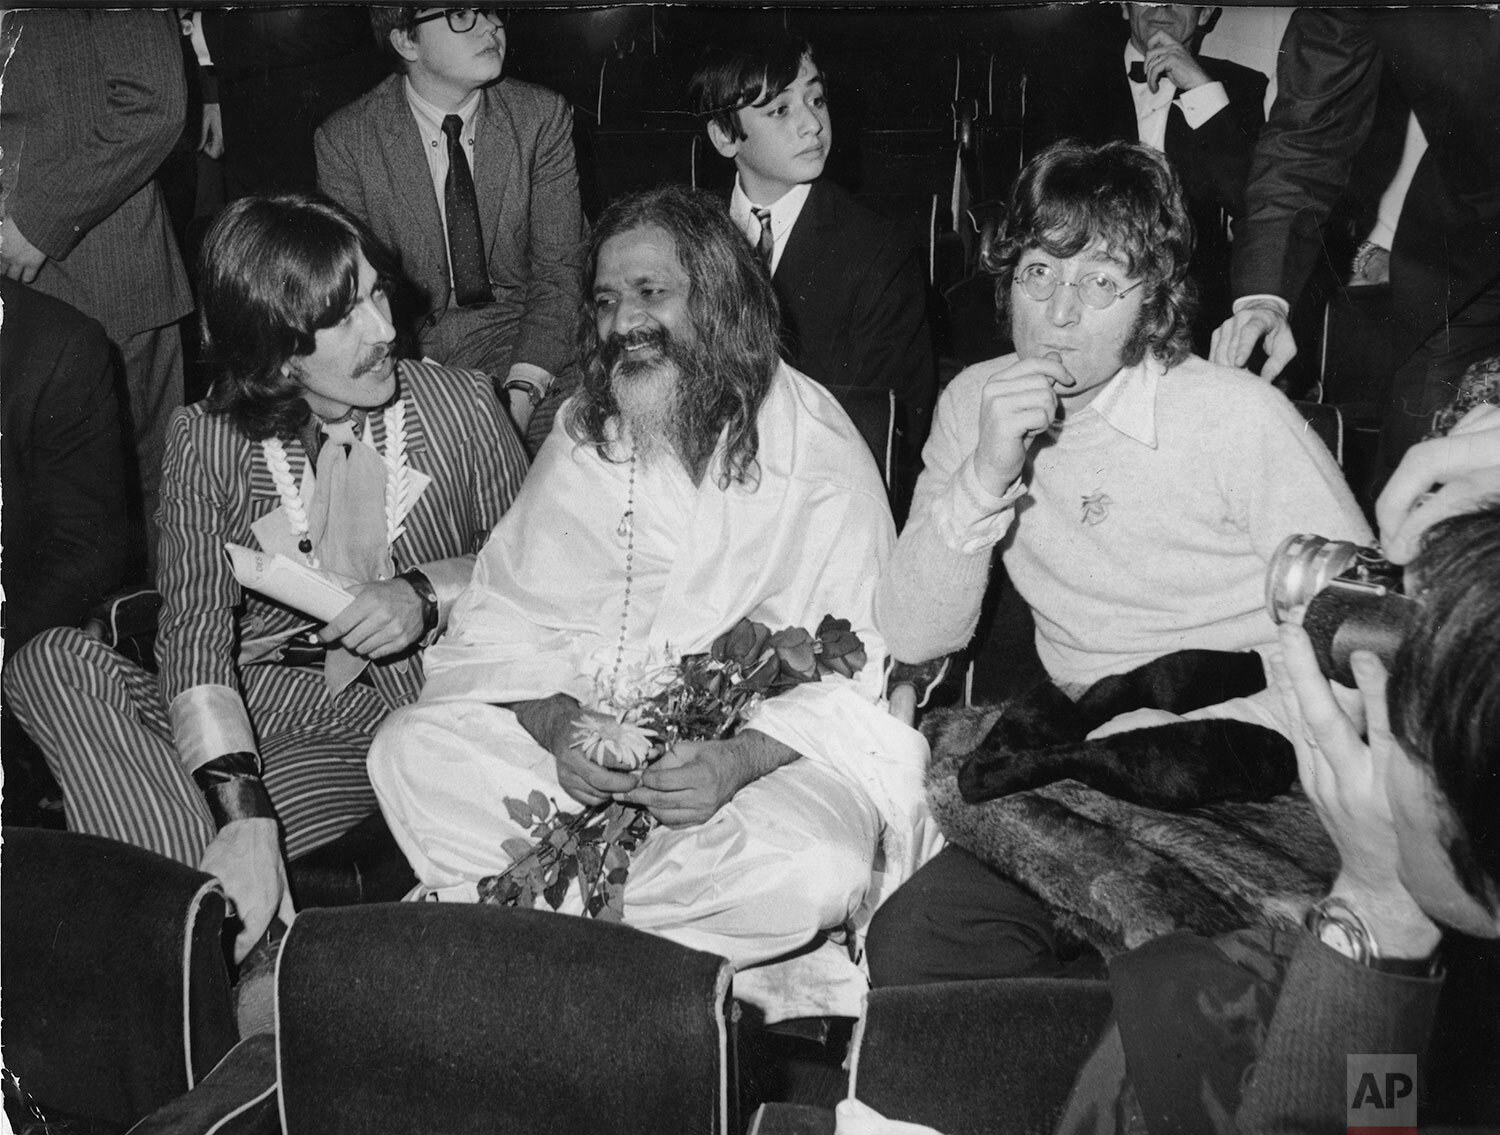  Maharishi Mahesh Yogi, considered as the "spiritual father" of the Beatles sits amidst George Harrison, left and John Lennon, during the UNICEF gala at the Palais du Chaillot in Paris, December 15, 1967. (AP Photo) 